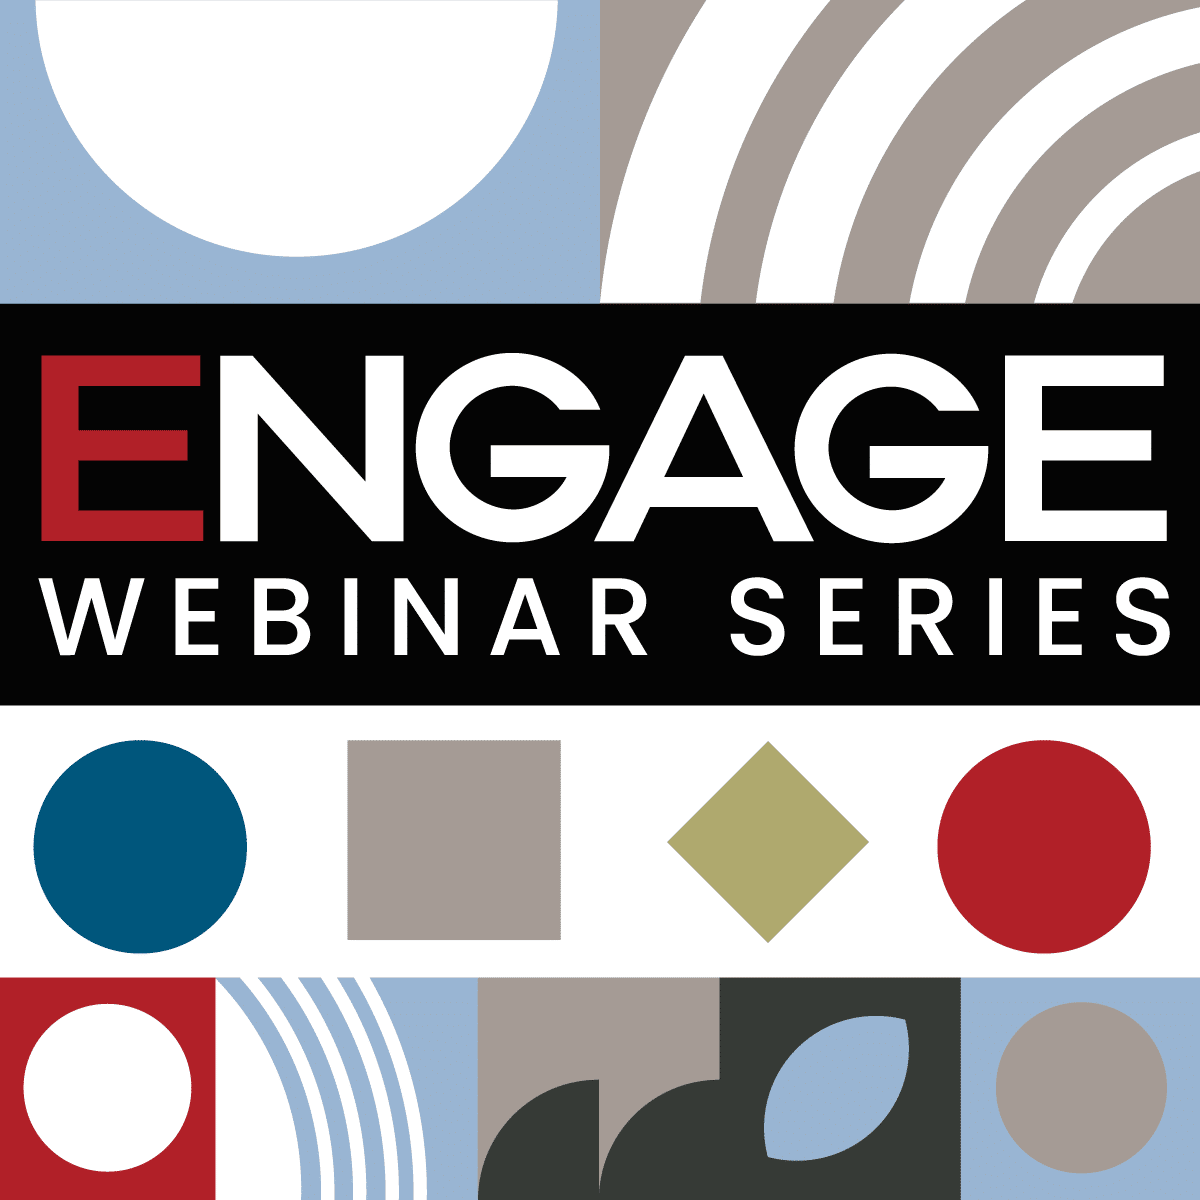 ENGAGE Webinar Series square feature image - ENGAGE logo on a geometric background in red, blue, grey, black and white